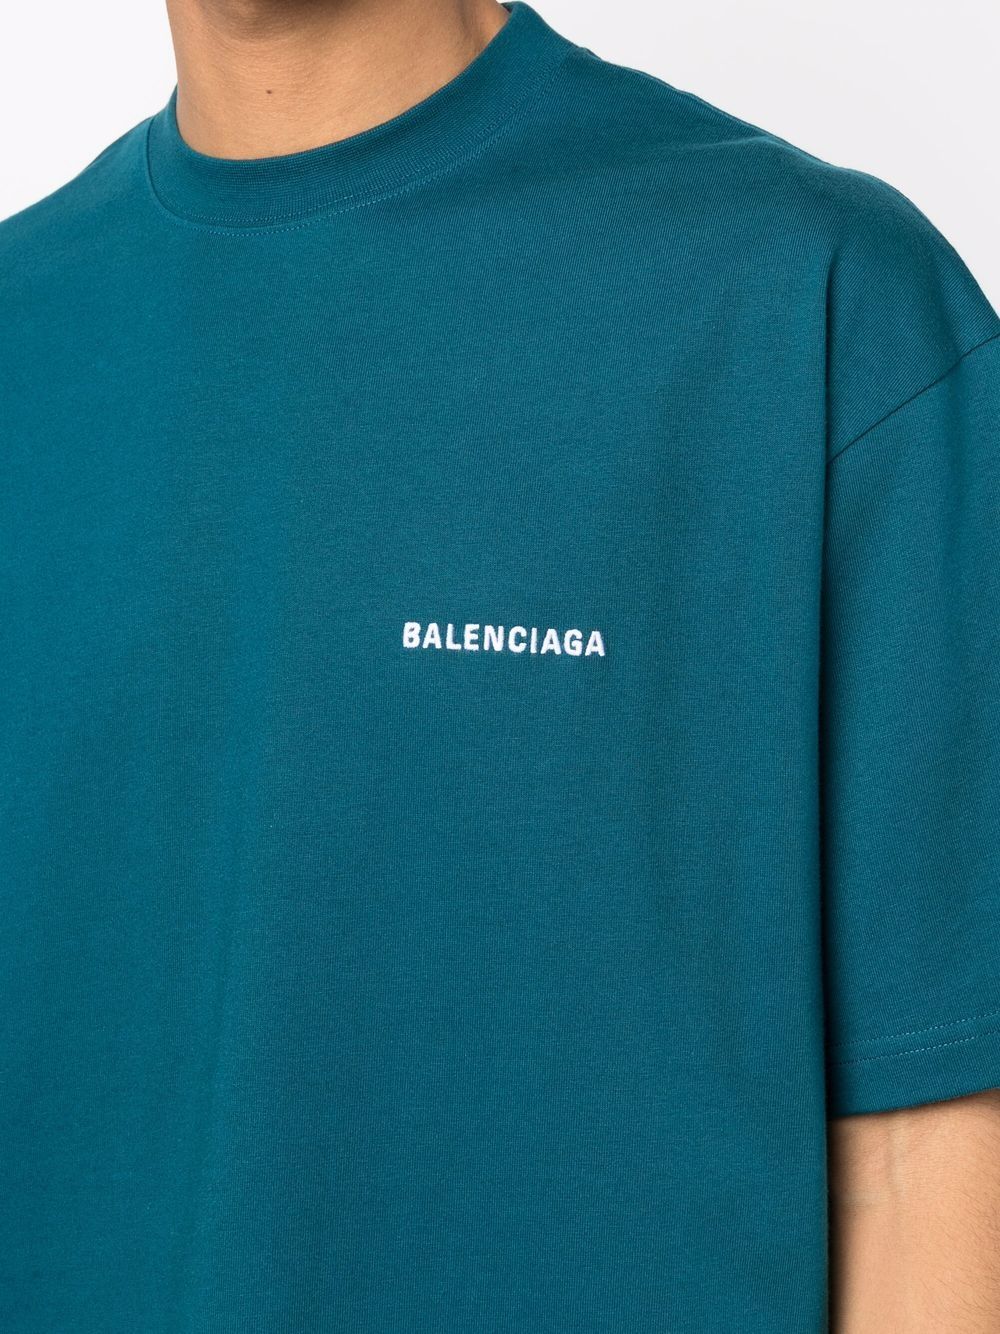 Balenciaga Embroidered Logo Oversized T-Shirt in Blue